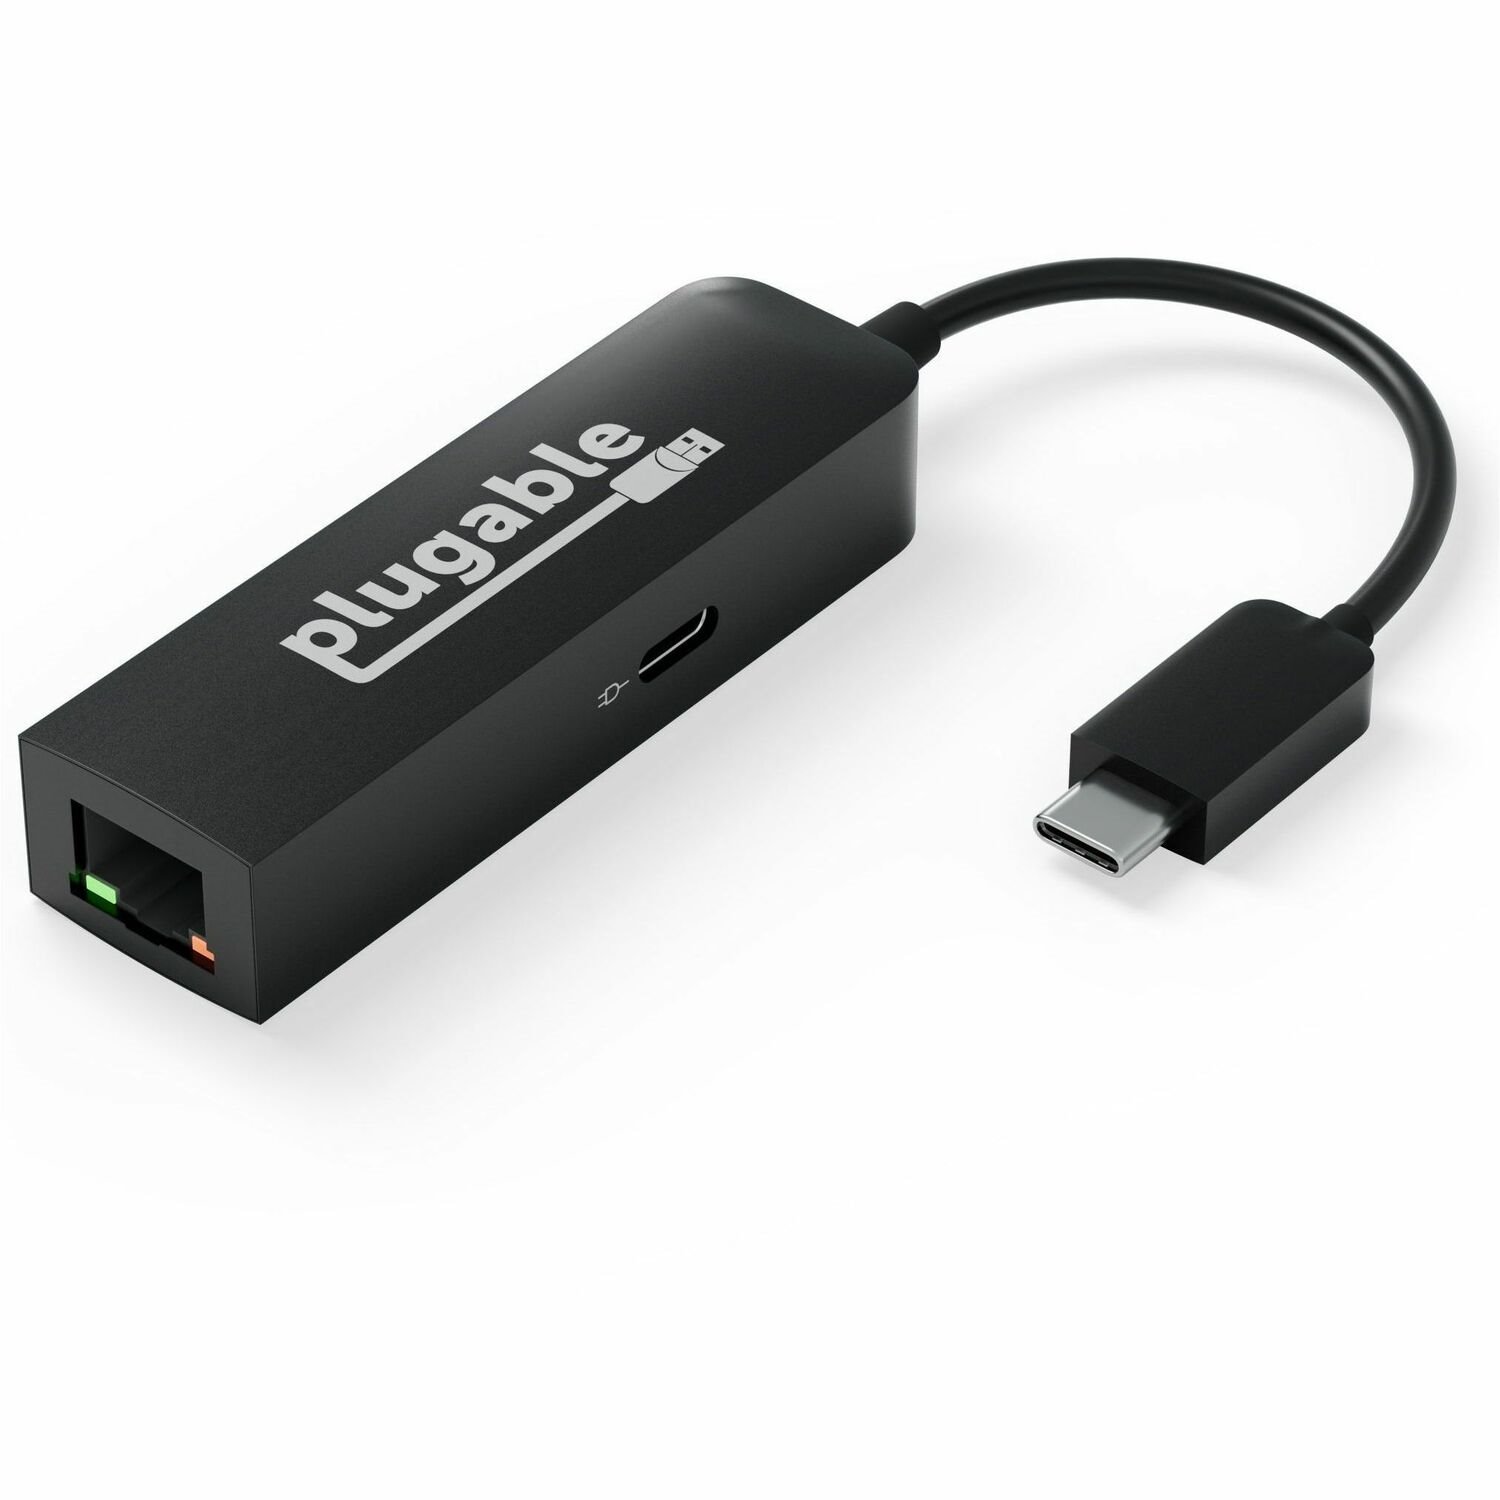 Plugable USB C to Ethernet Adapter 2.5Gb with 100W USB-C PD Charging, 2.5 Gigabit Type C USB Ethernet Adapter